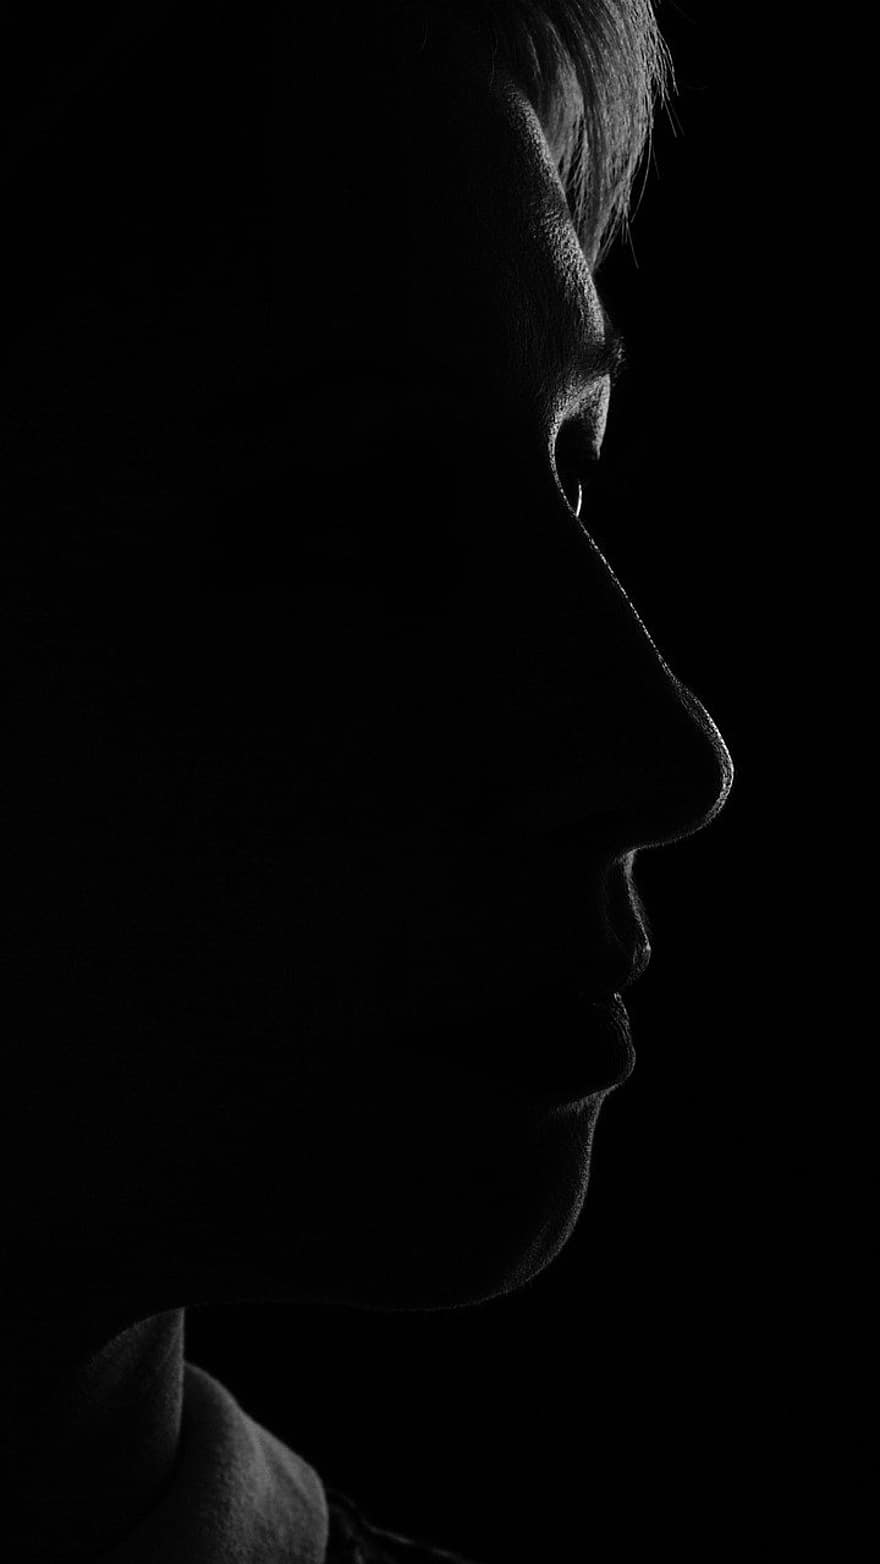 woman, beauty, monochrome, one person, adult, women, young adult, dark, men, close-up, sadness